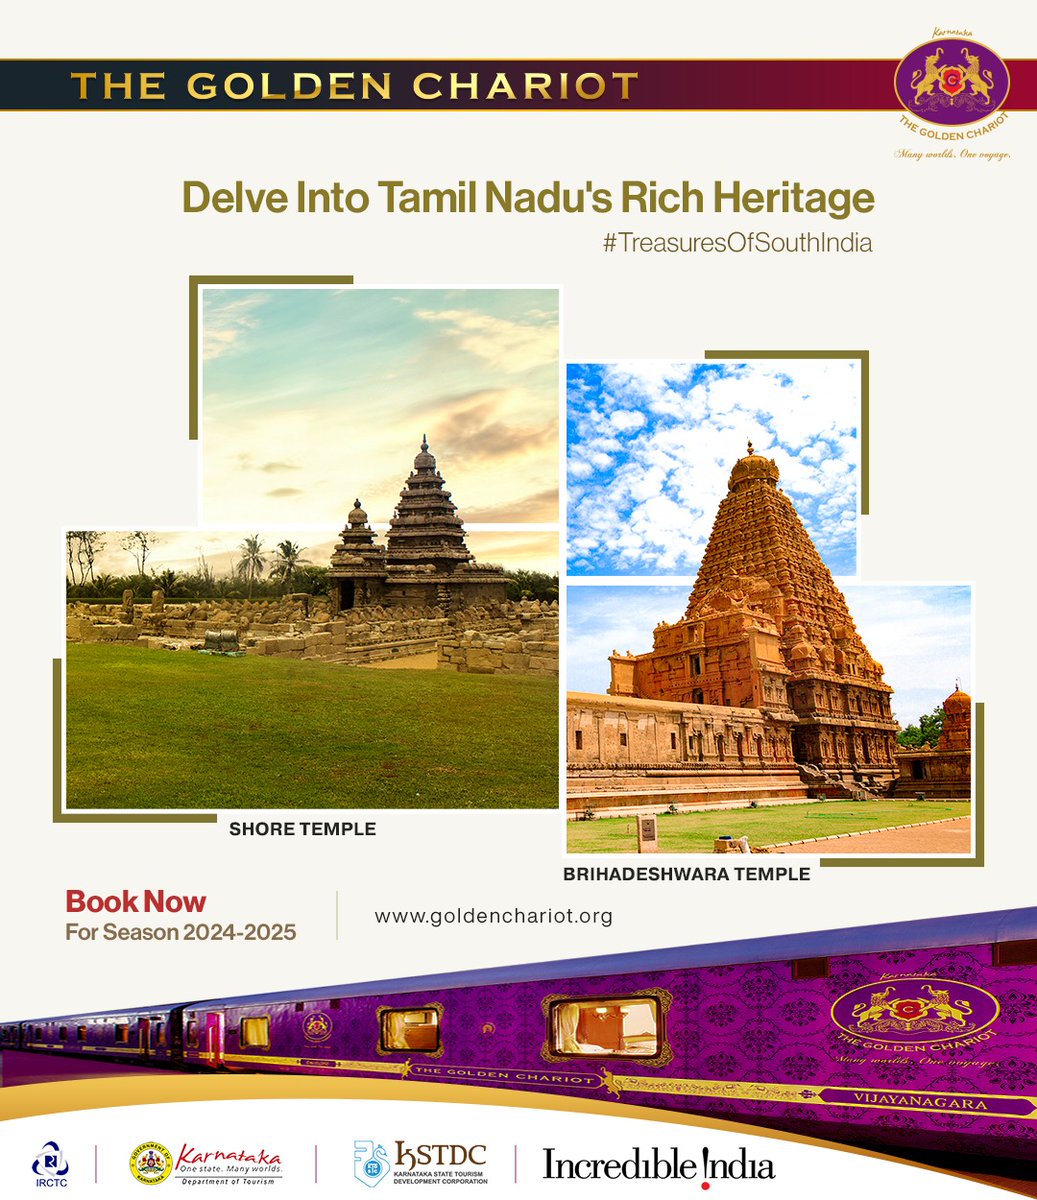 Dive into the rich heritage of Tamil Nadu on your journey aboard the #GoldenChariot.

Visit the link goldenchariot.org to book a tour.

#TreasuresOfSouthIndia #TravelExperiences #travelindia #luxurytravel #SouthIndia #travellife #BucketListAdventure #IncredibleIndia #travel